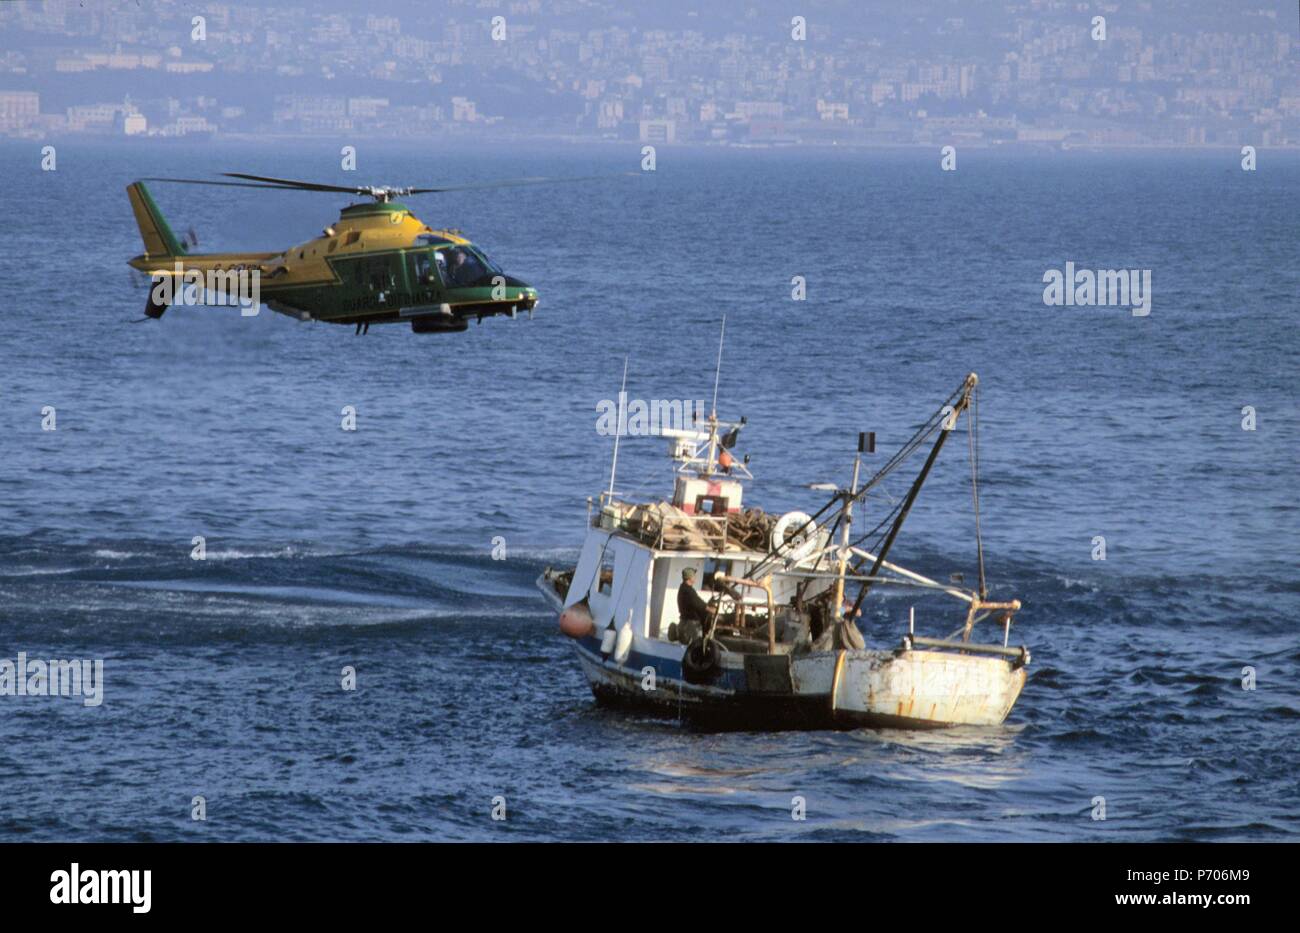 Italian finance police, helicopter controls a fishing vessel  in the Gulf of Naples Stock Photo